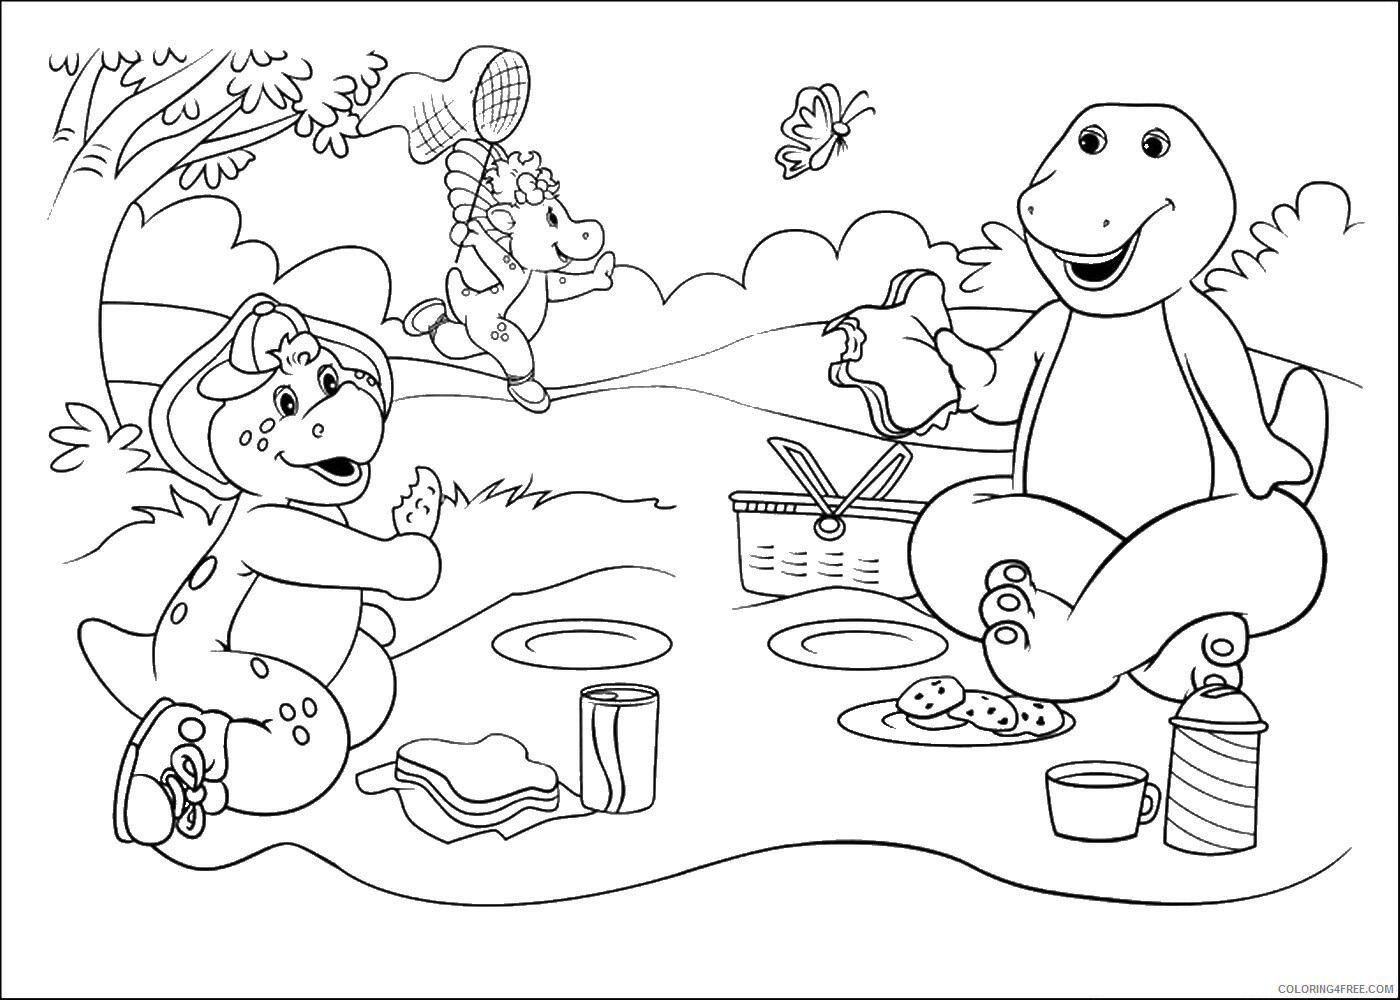 Barney and Friends Coloring Pages TV Film barney_cl_1045 Printable 2020 00618 Coloring4free